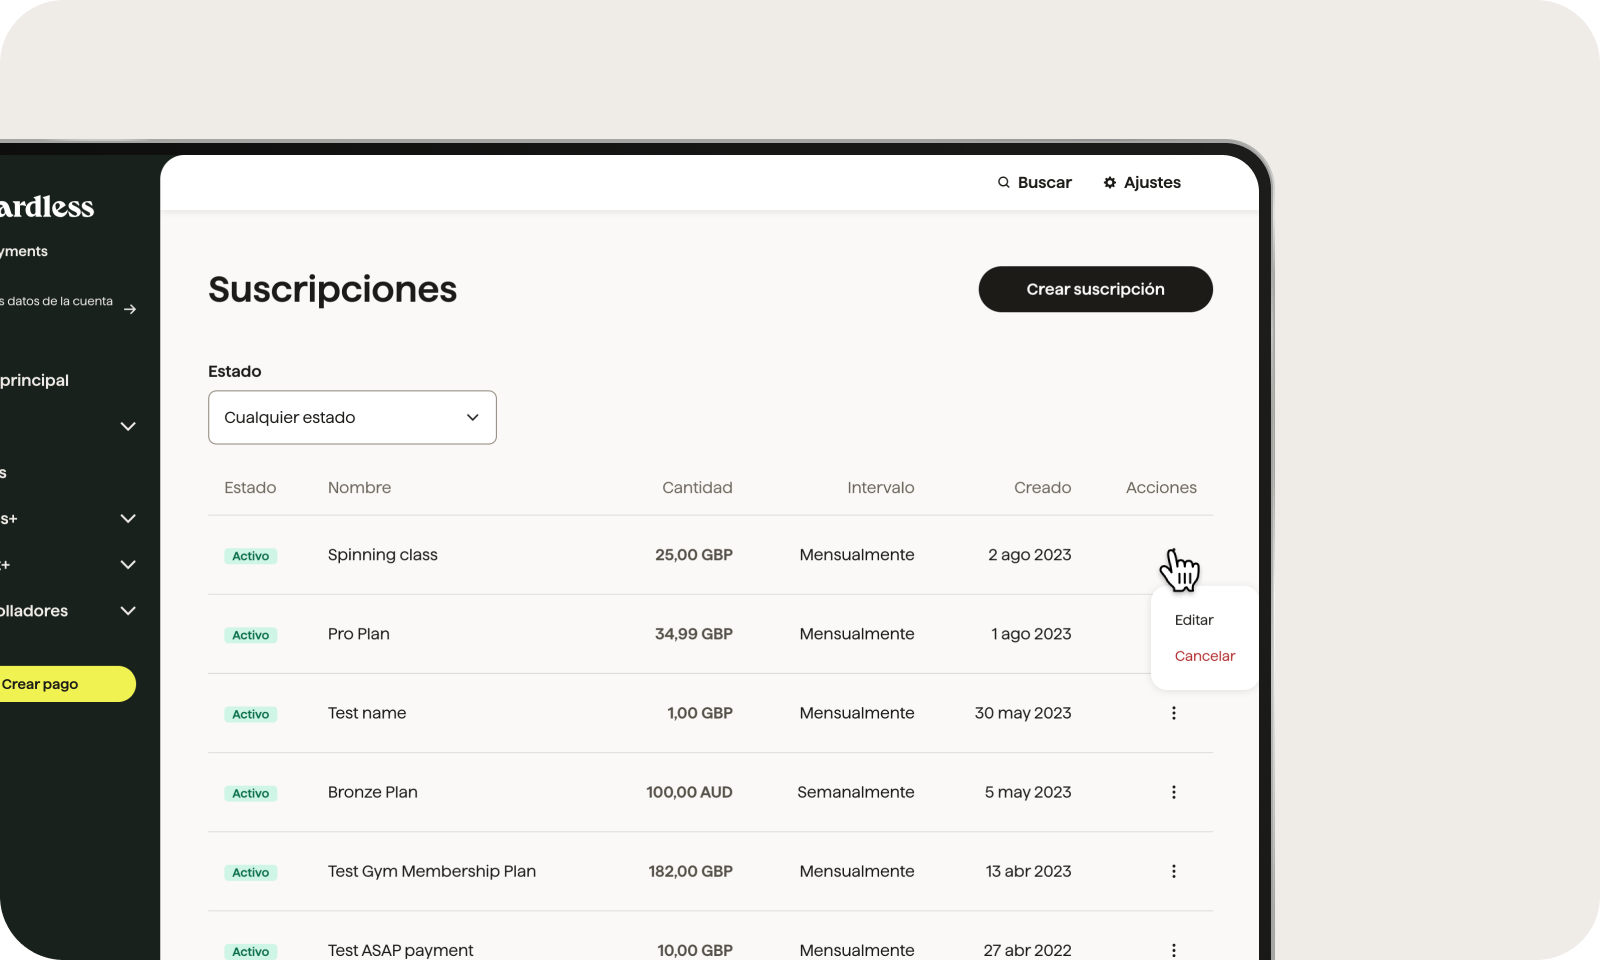 Subscriptions dashboard